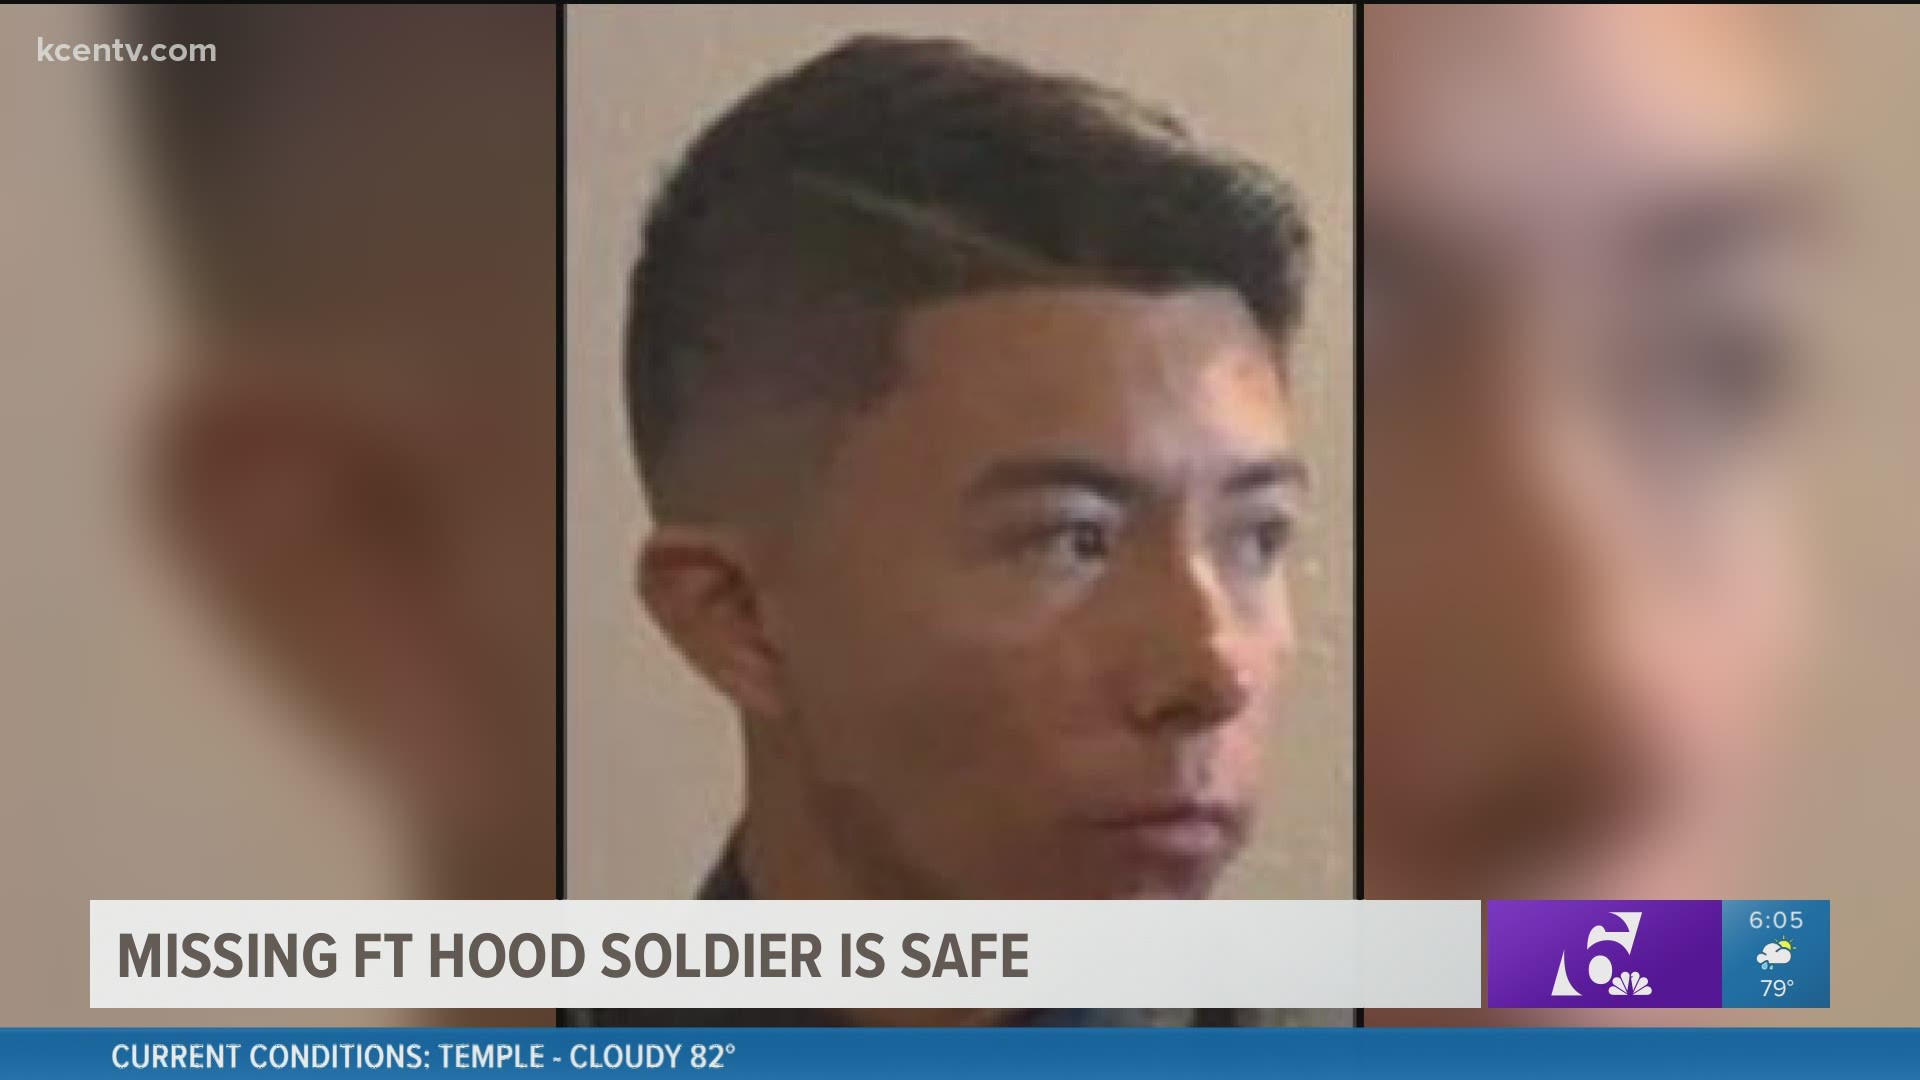 Salas' family said the soldier recently spoke to the family pastor, but Fort Hood said the soldier is still considered 'absent-unknown' in regards to duty status.